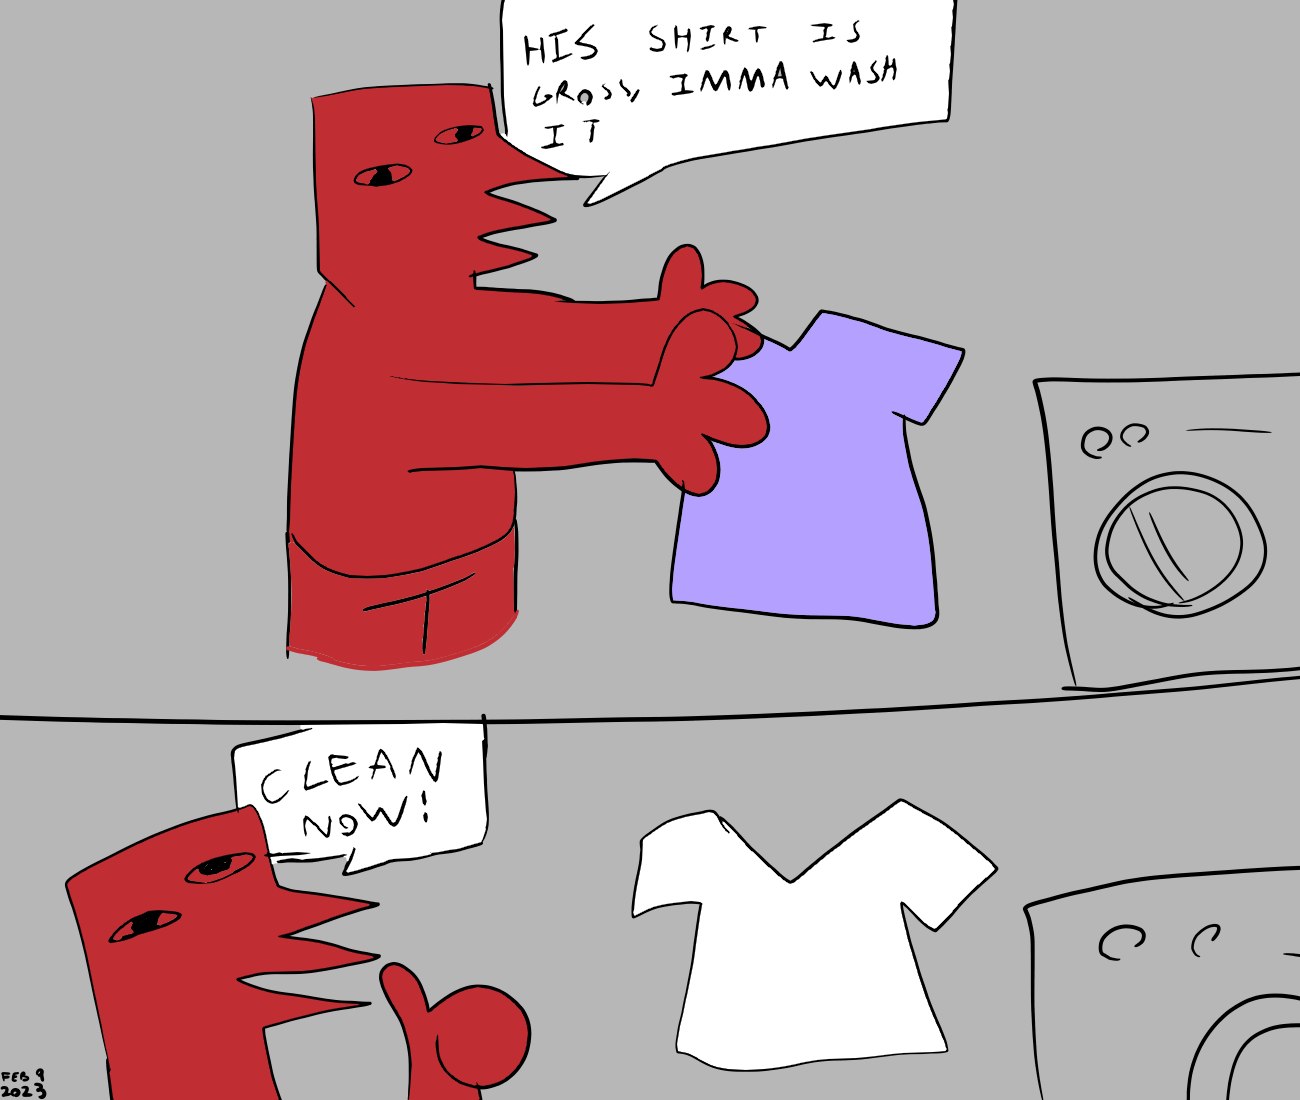 The red character decides to wash the purple shirt. Once he washes it, the shirt is now white.